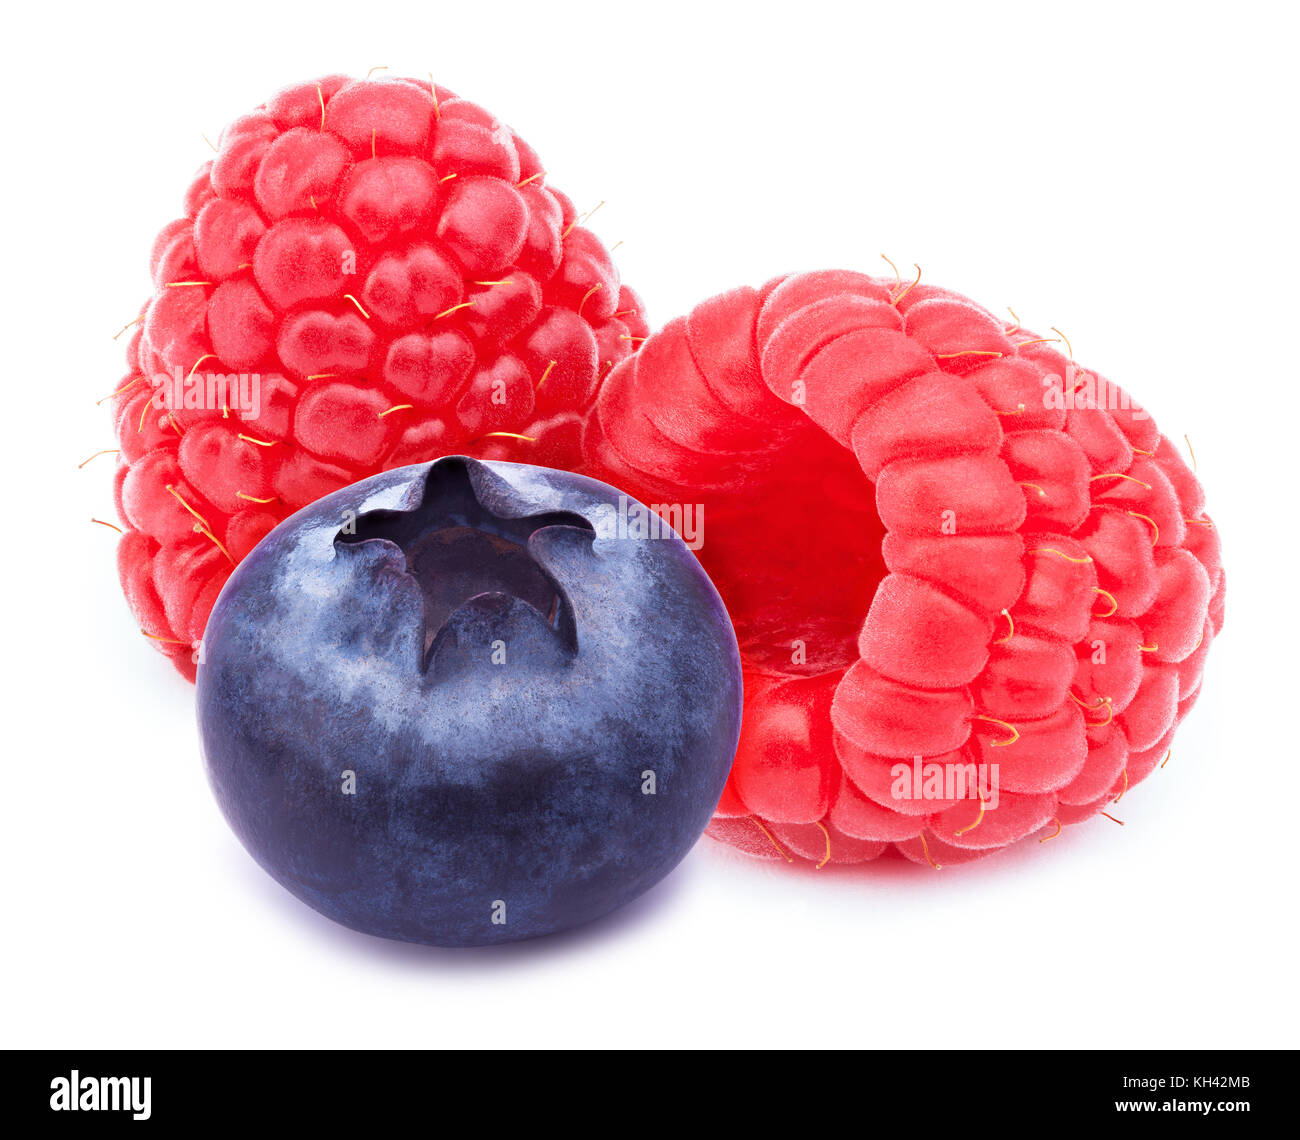 Raspberries and blueberry isolated Stock Photo